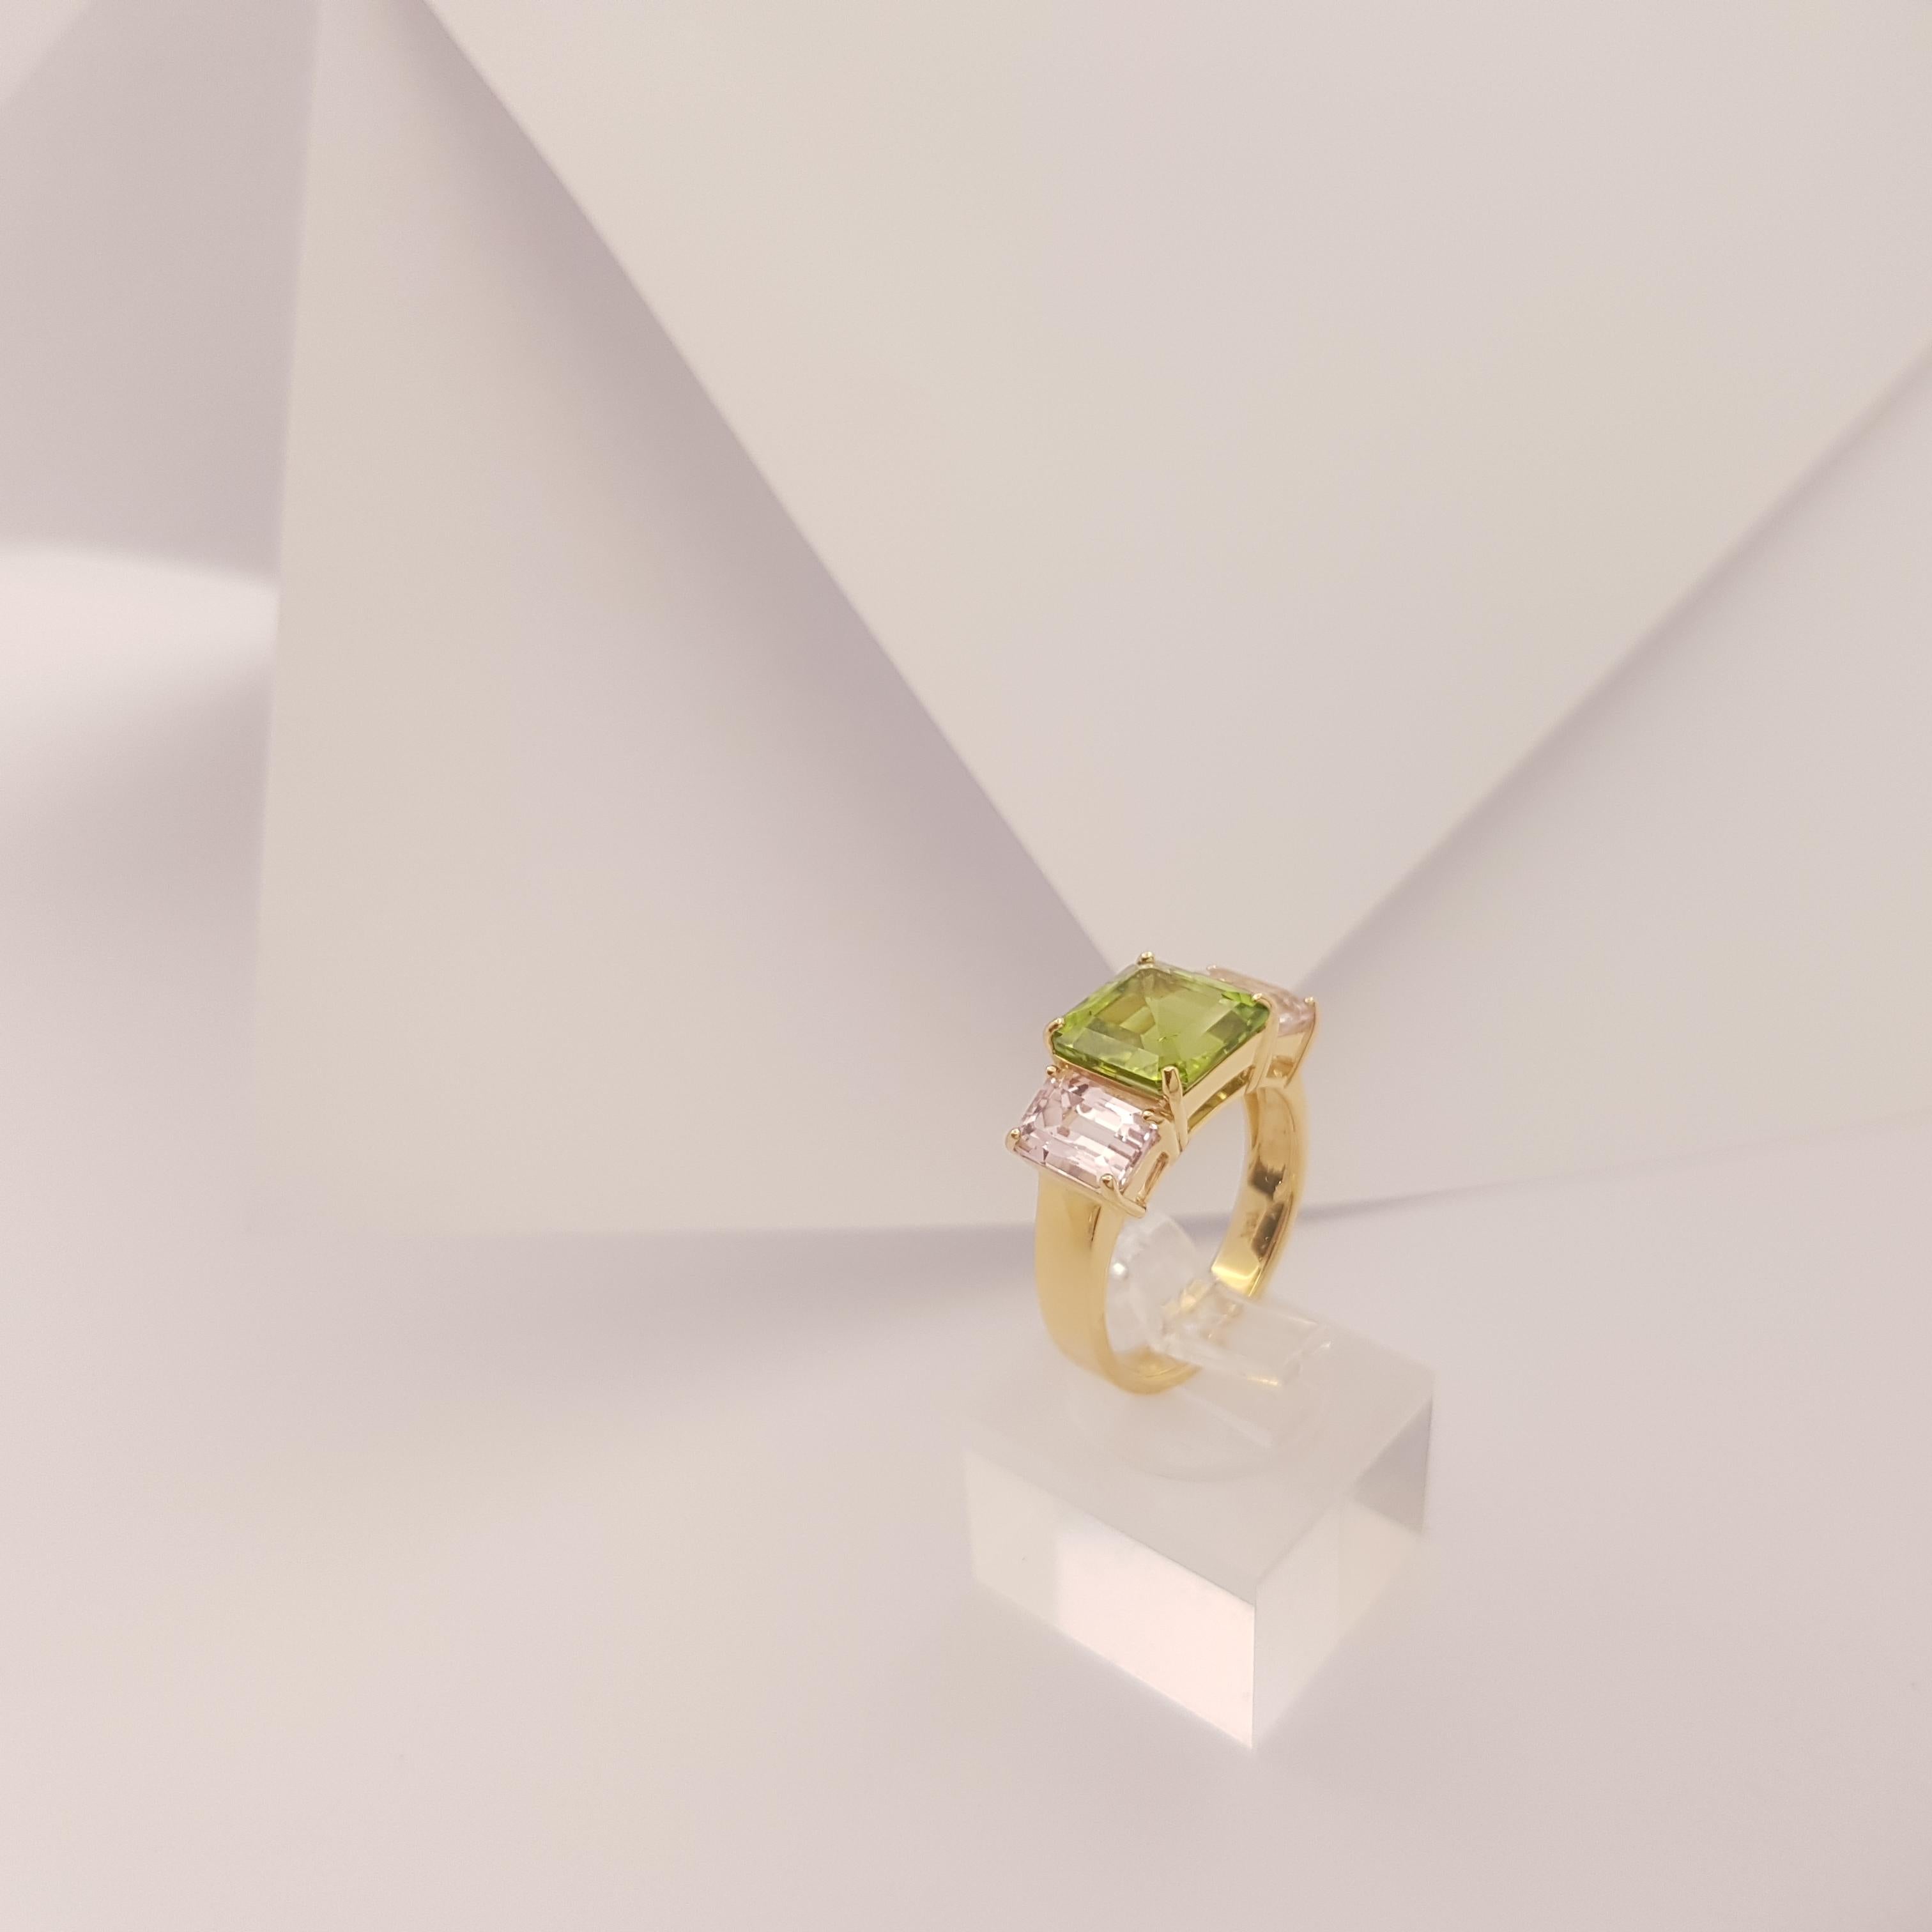 Peridot 3.95 carats with Morganite 2.28 carats Ring set in 18k Gold Settings For Sale 4